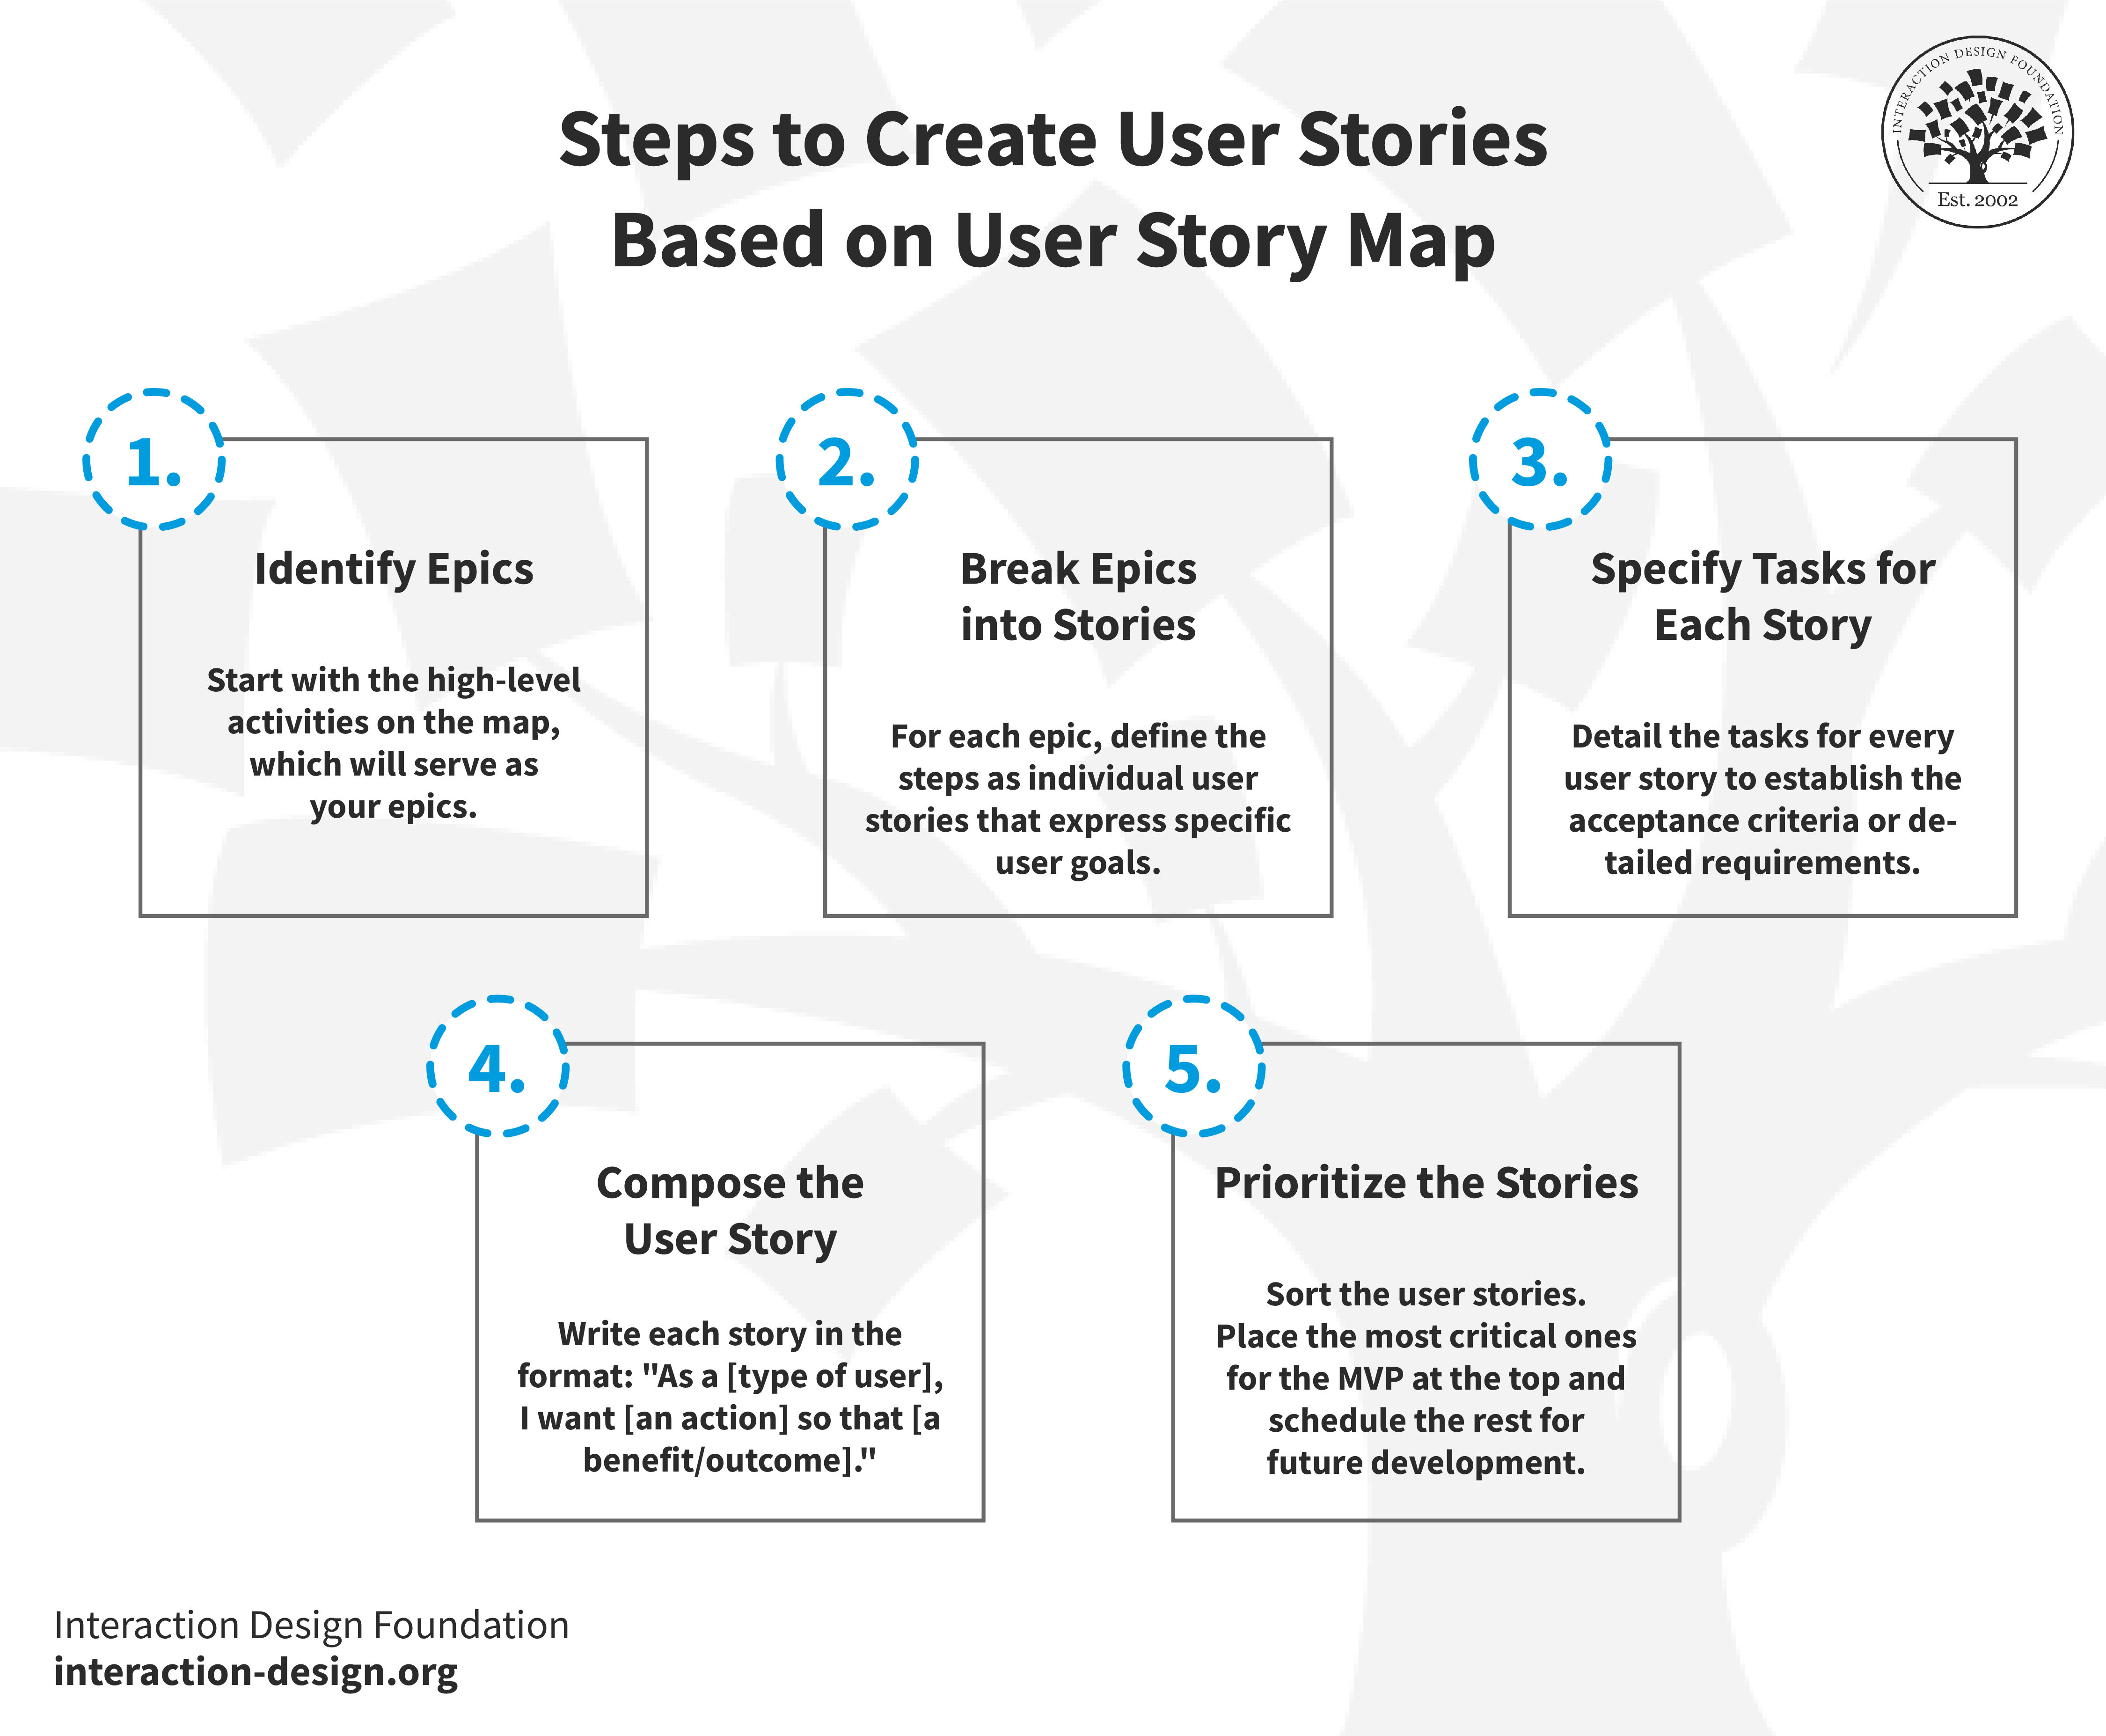 5 Steps to create user stories from a user story map.